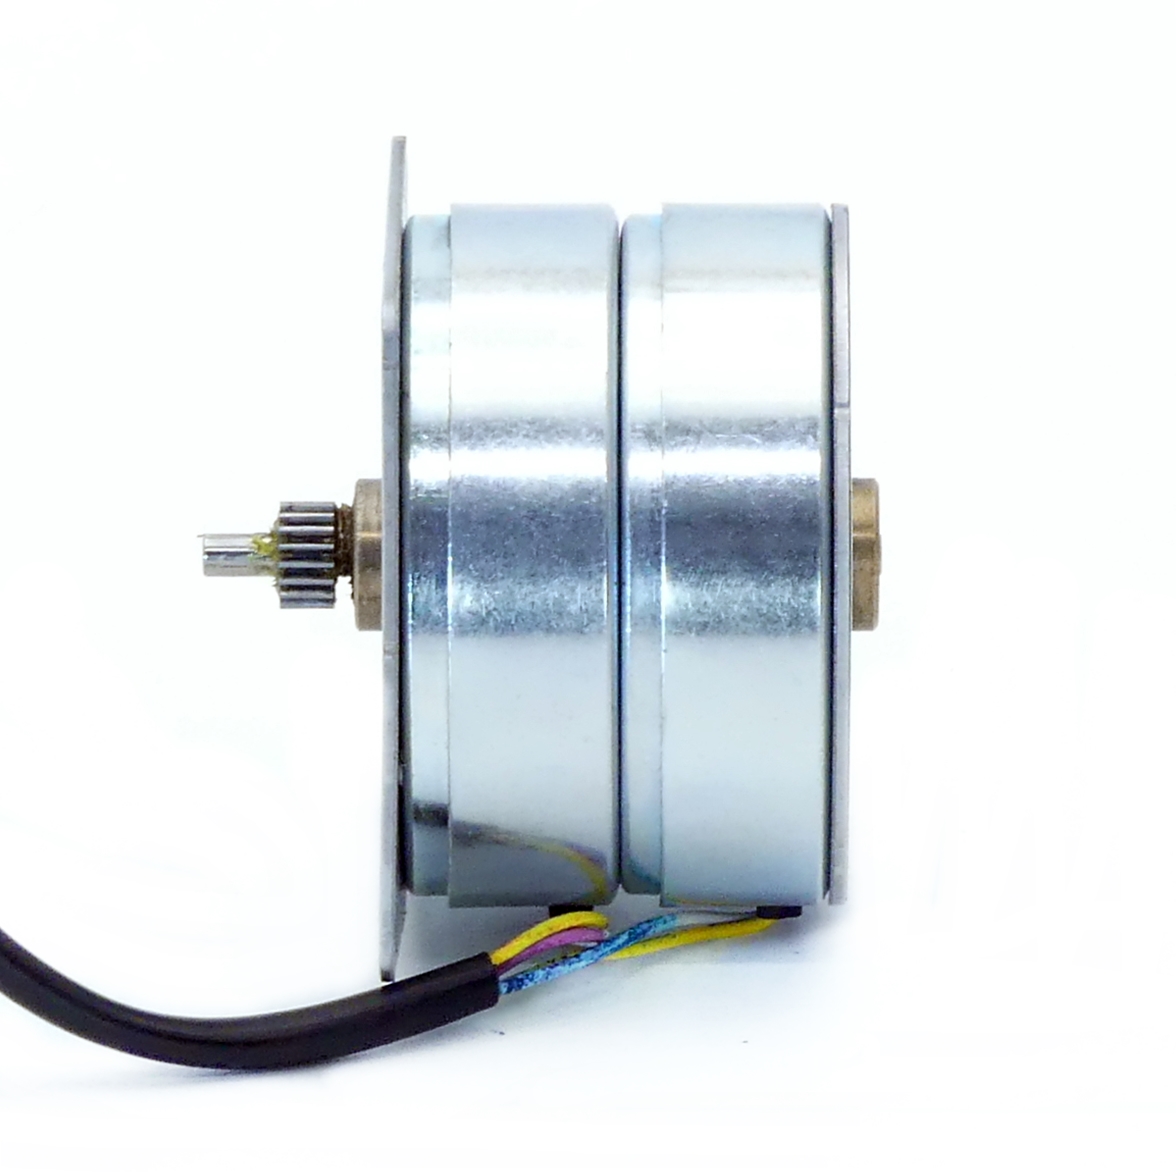 Synchronous motor 